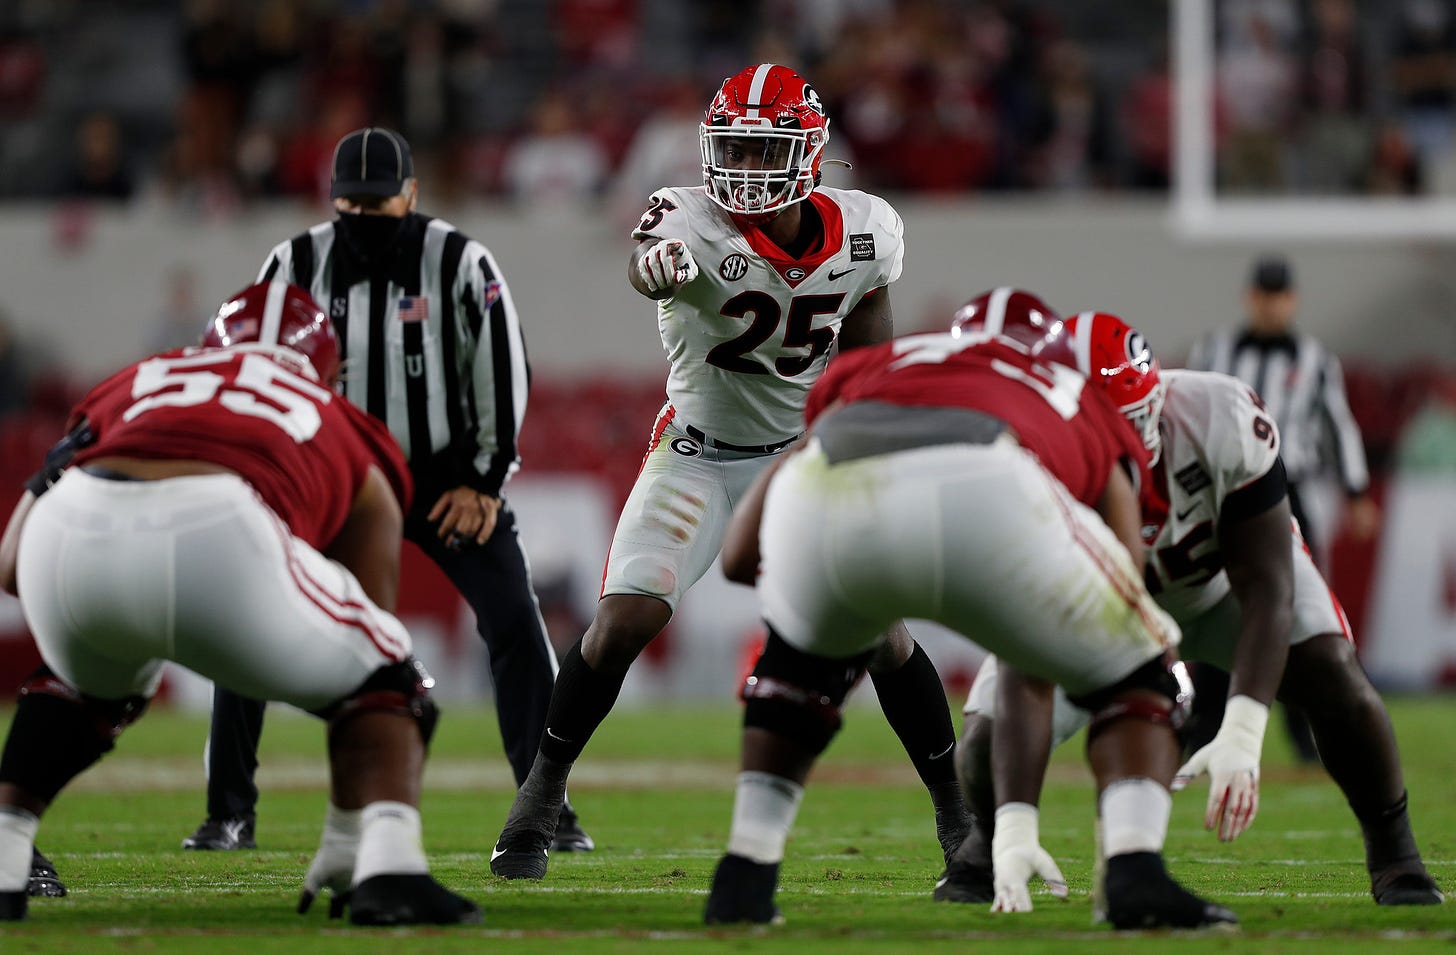 Georgia inside linebacker Quay Walker (25) during the Bulldogs' game with Alabama in Tuscaloosa, Ala., on Saturday, Oct. 17, 2020. (Photo by Skylar Lien)